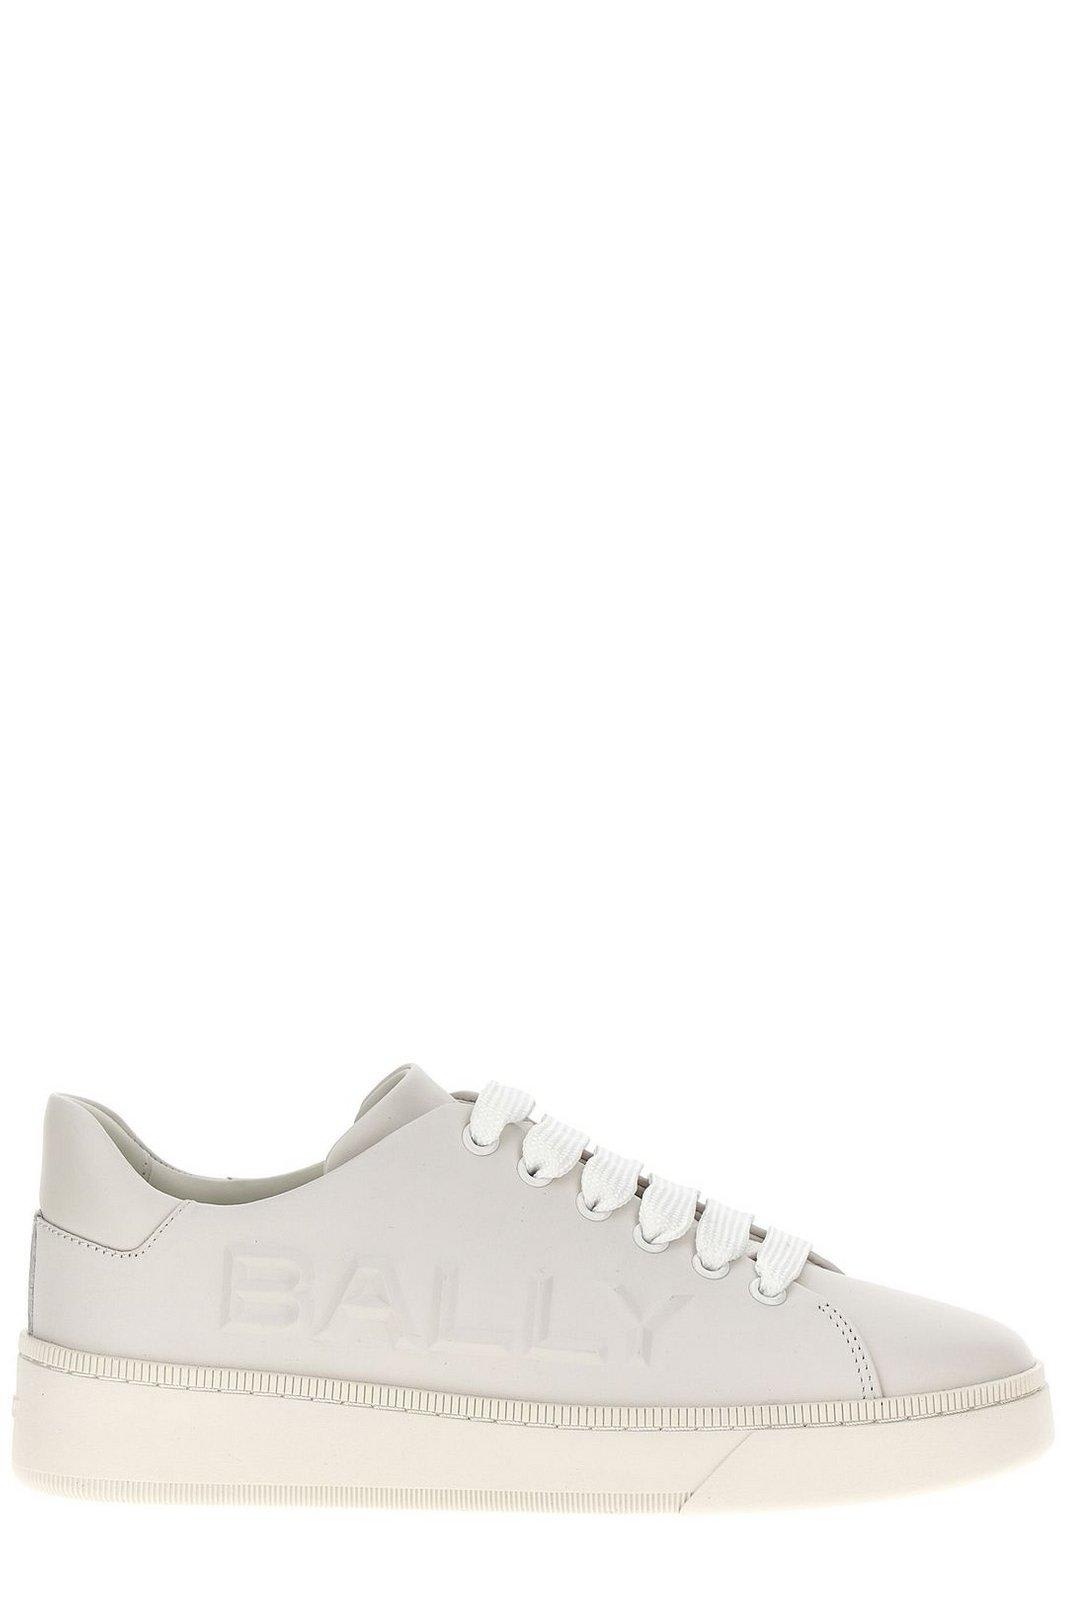 Shop Bally Round Toe Lace-up Sneakers In White